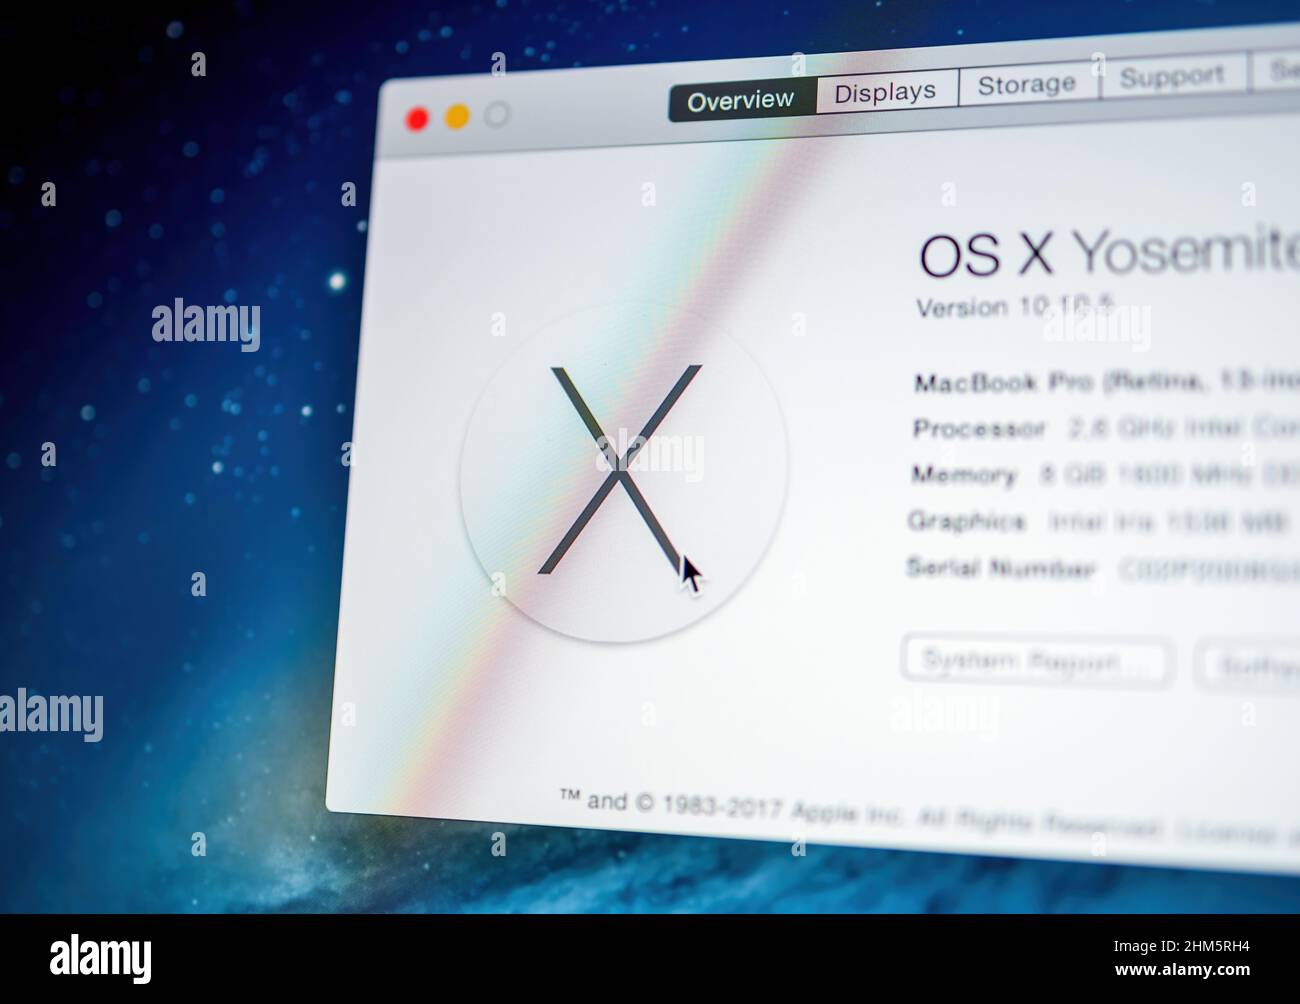 mac os x version 10.10.5 or later